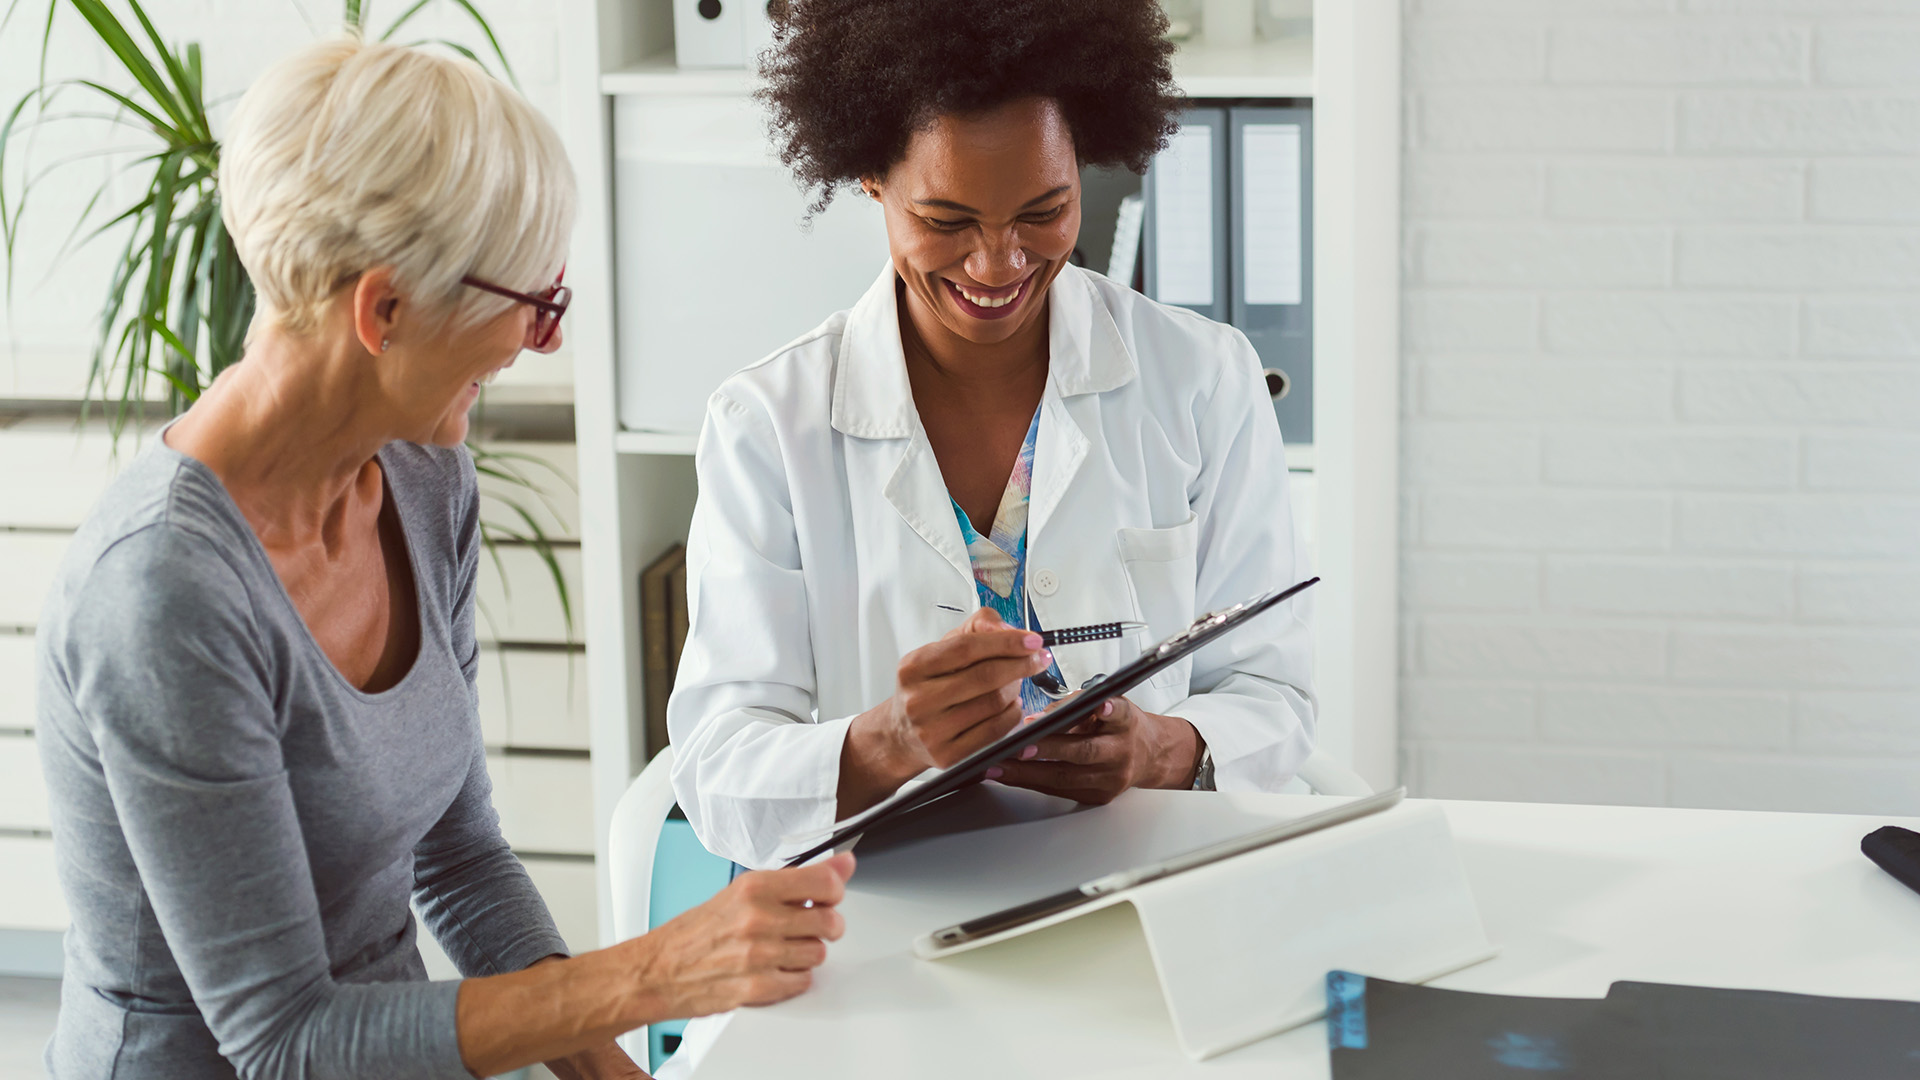 Senior woman looking at medical charts with woman doctor